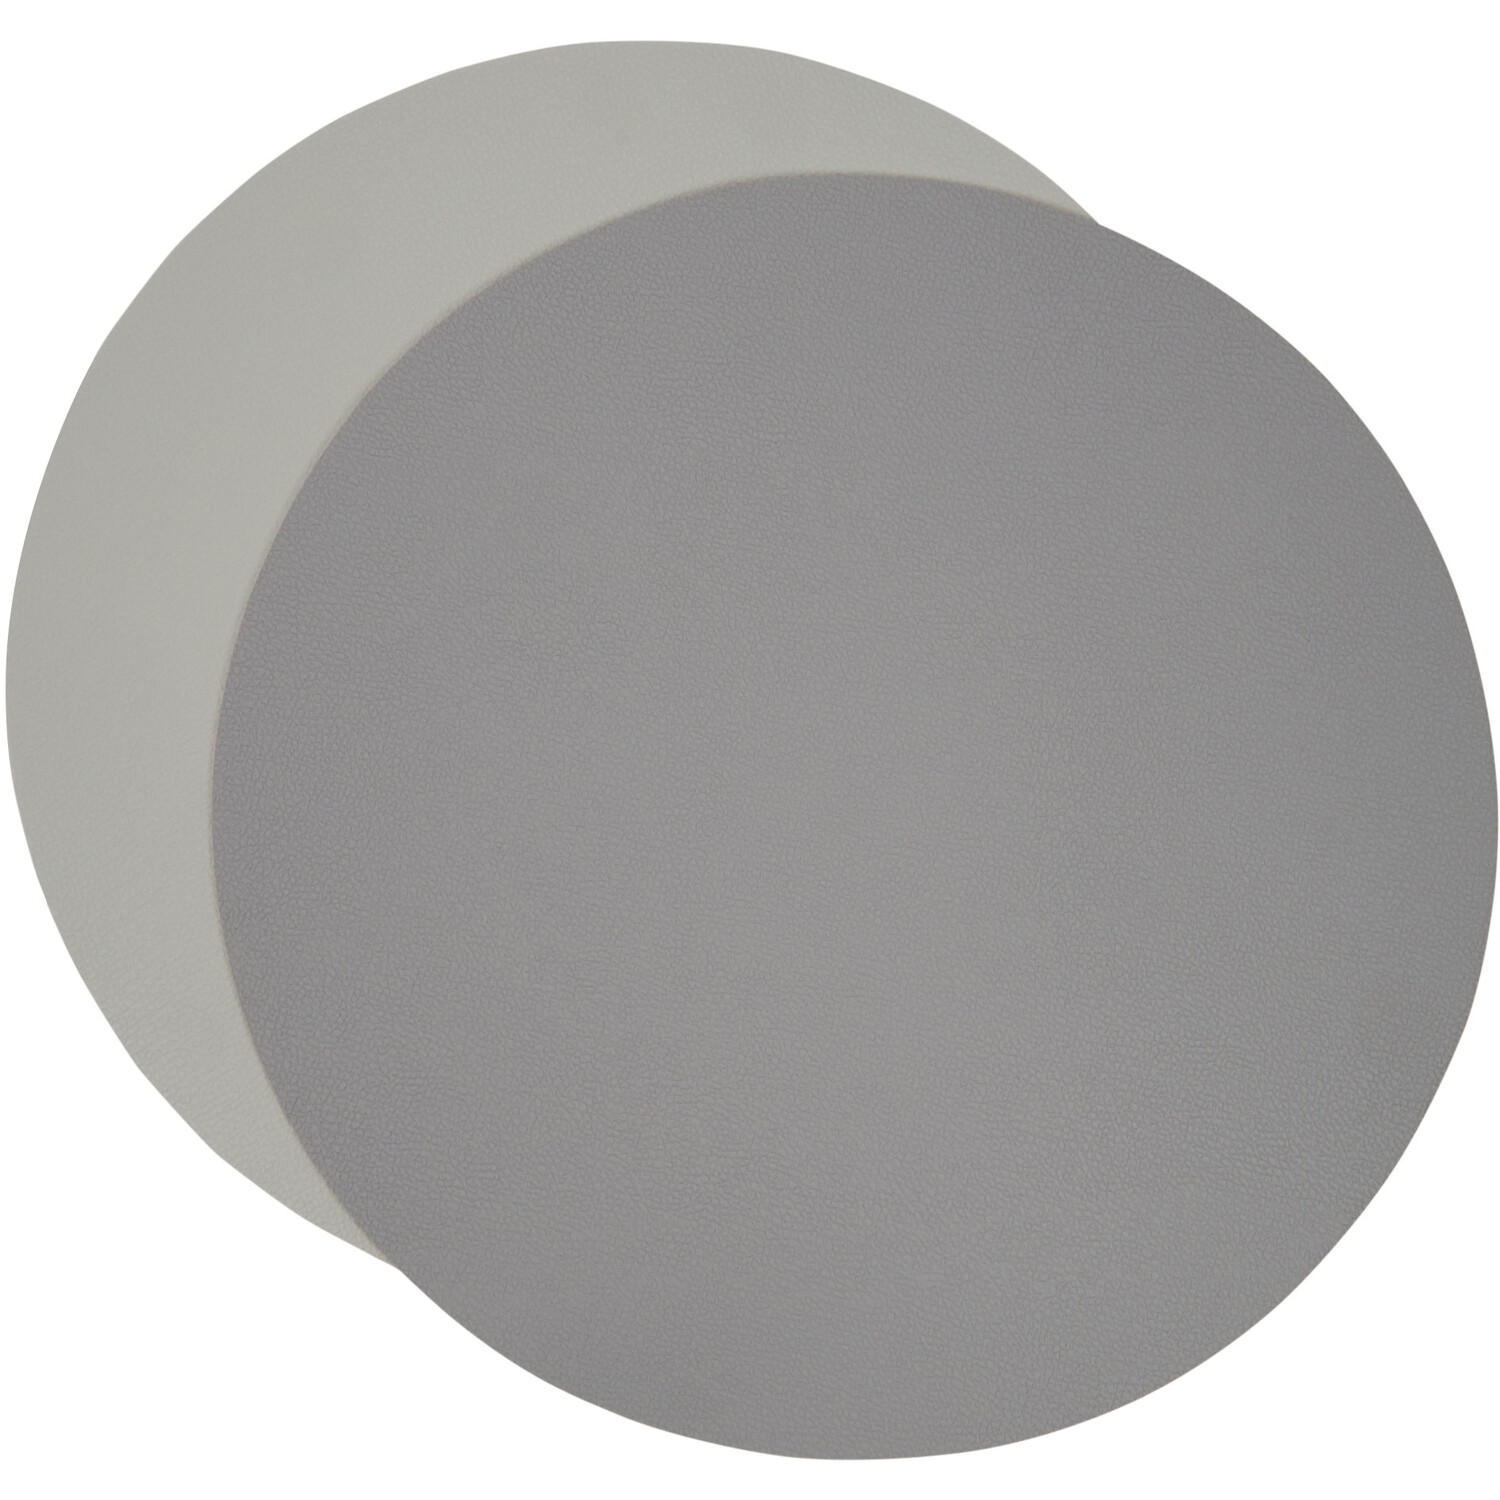 Set of 2 Round Placemats - Grey Image 3